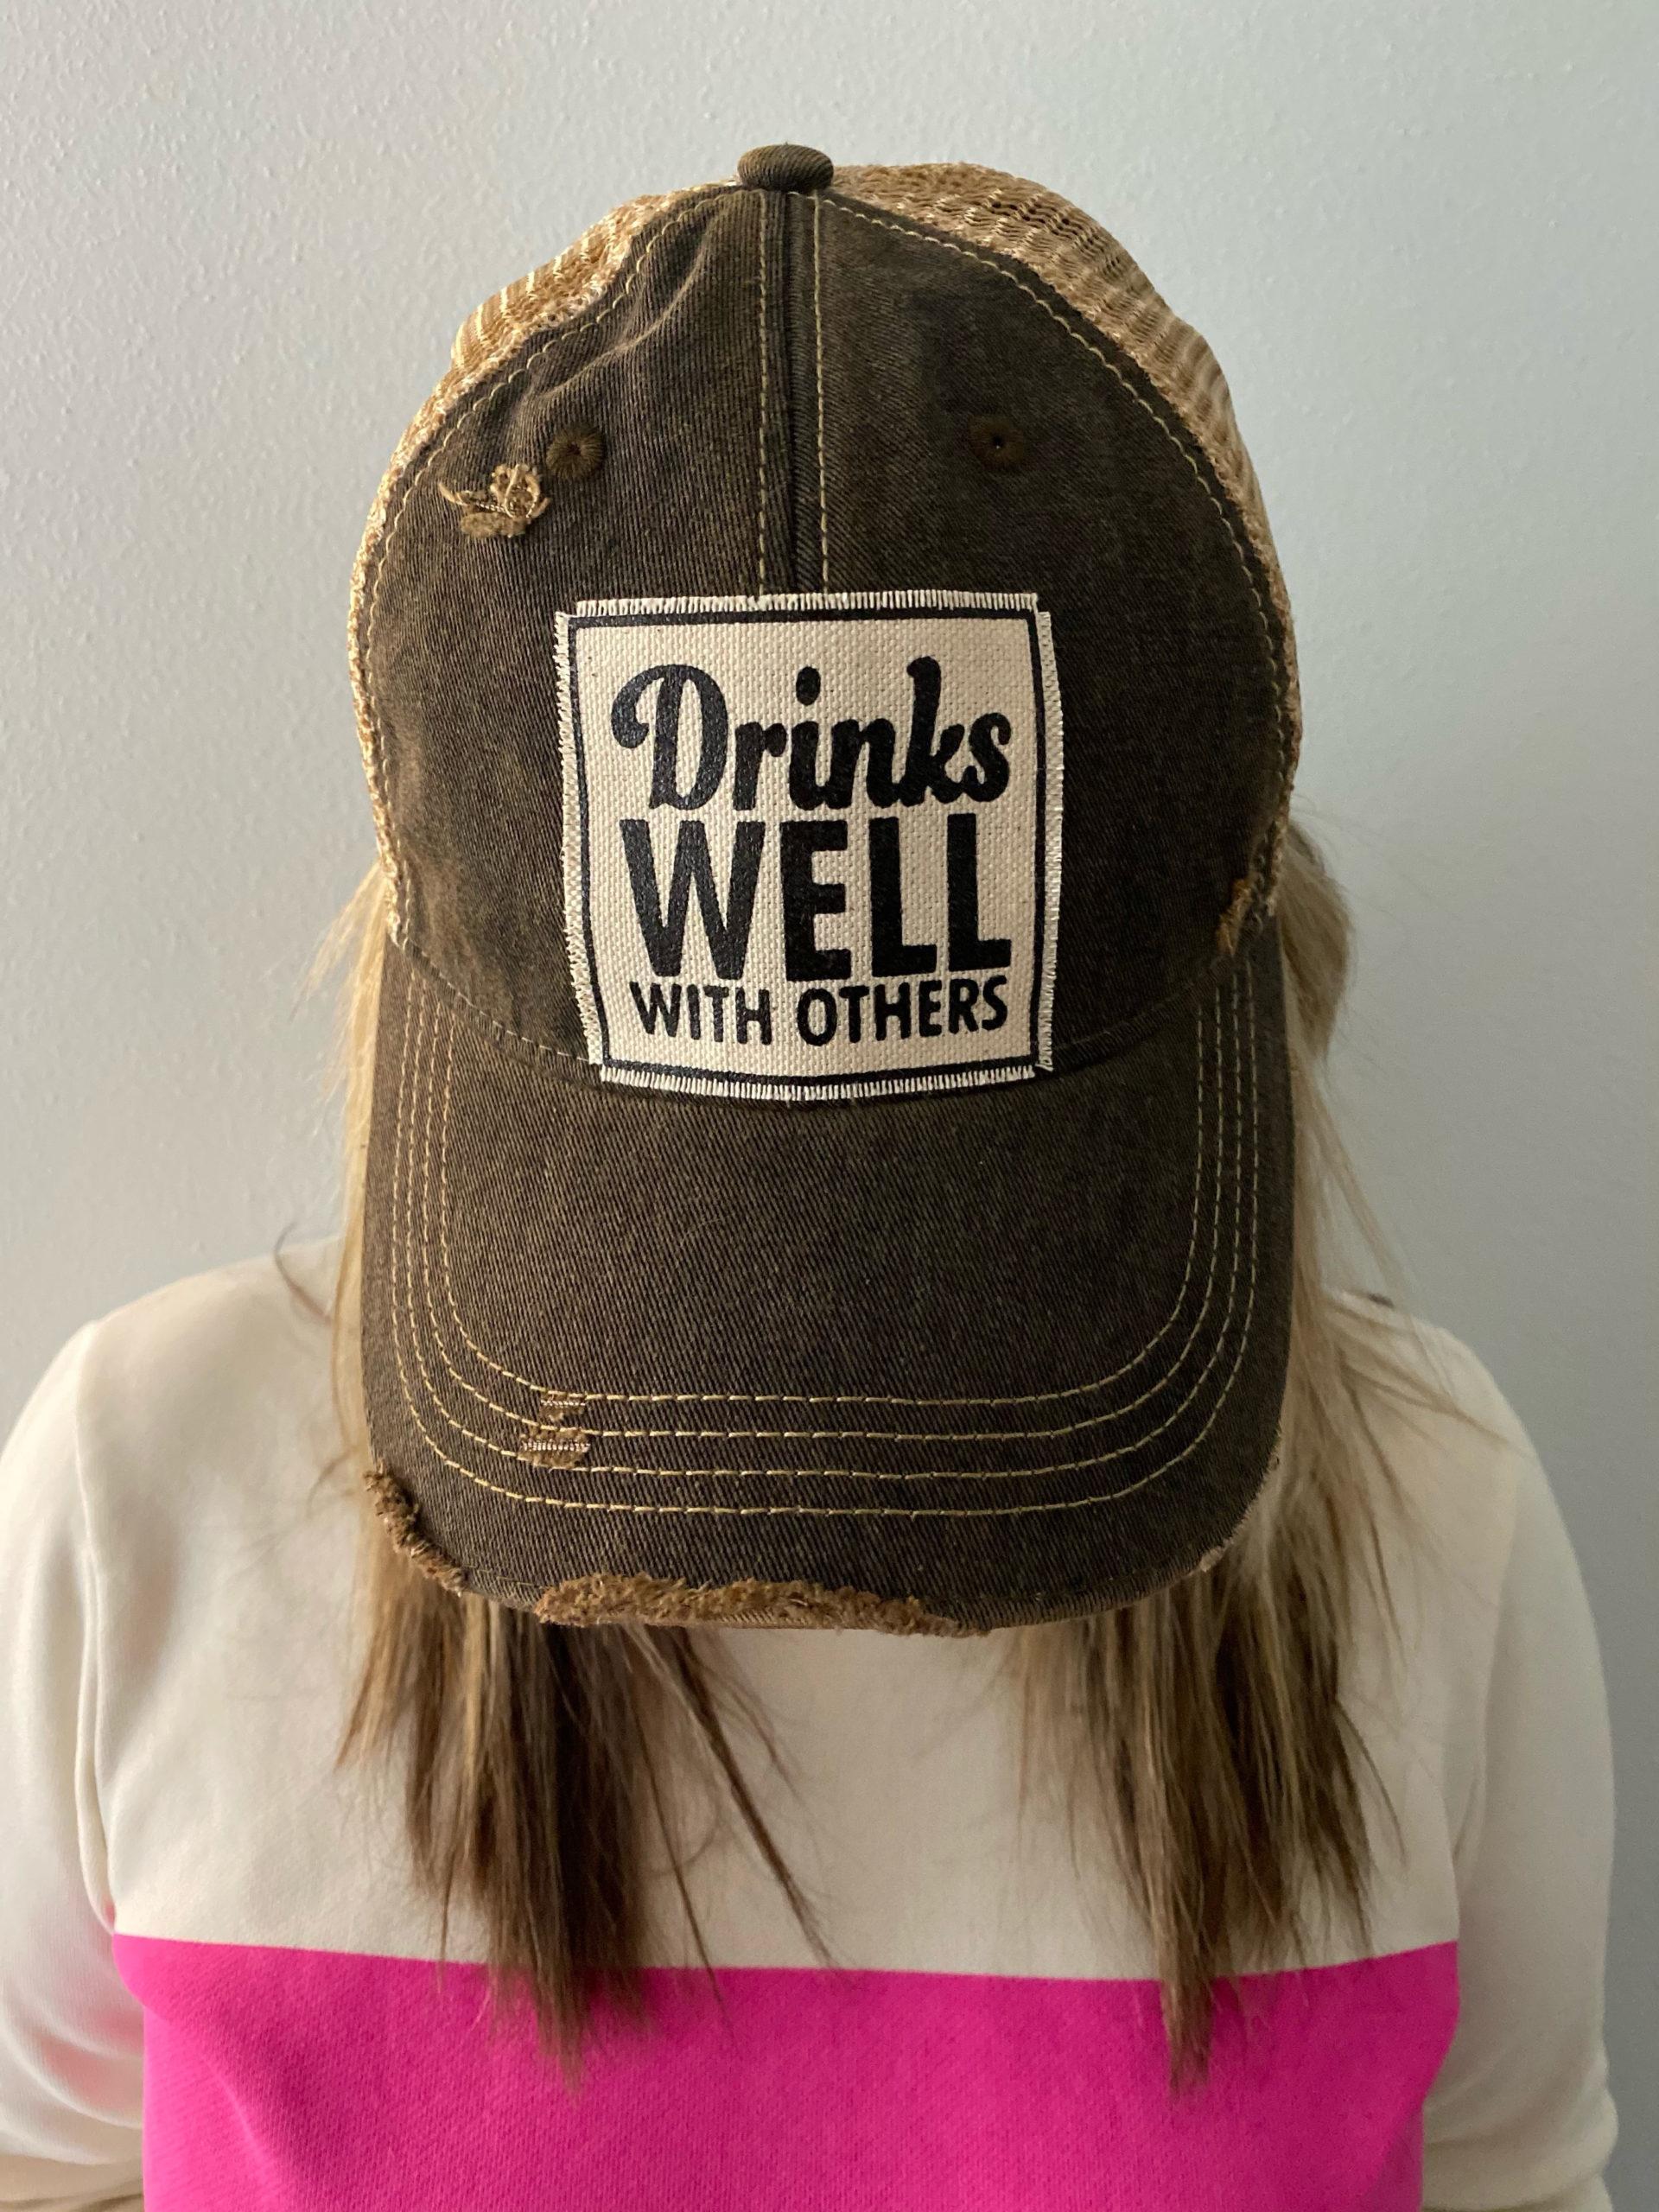 Drinks well with others Hats